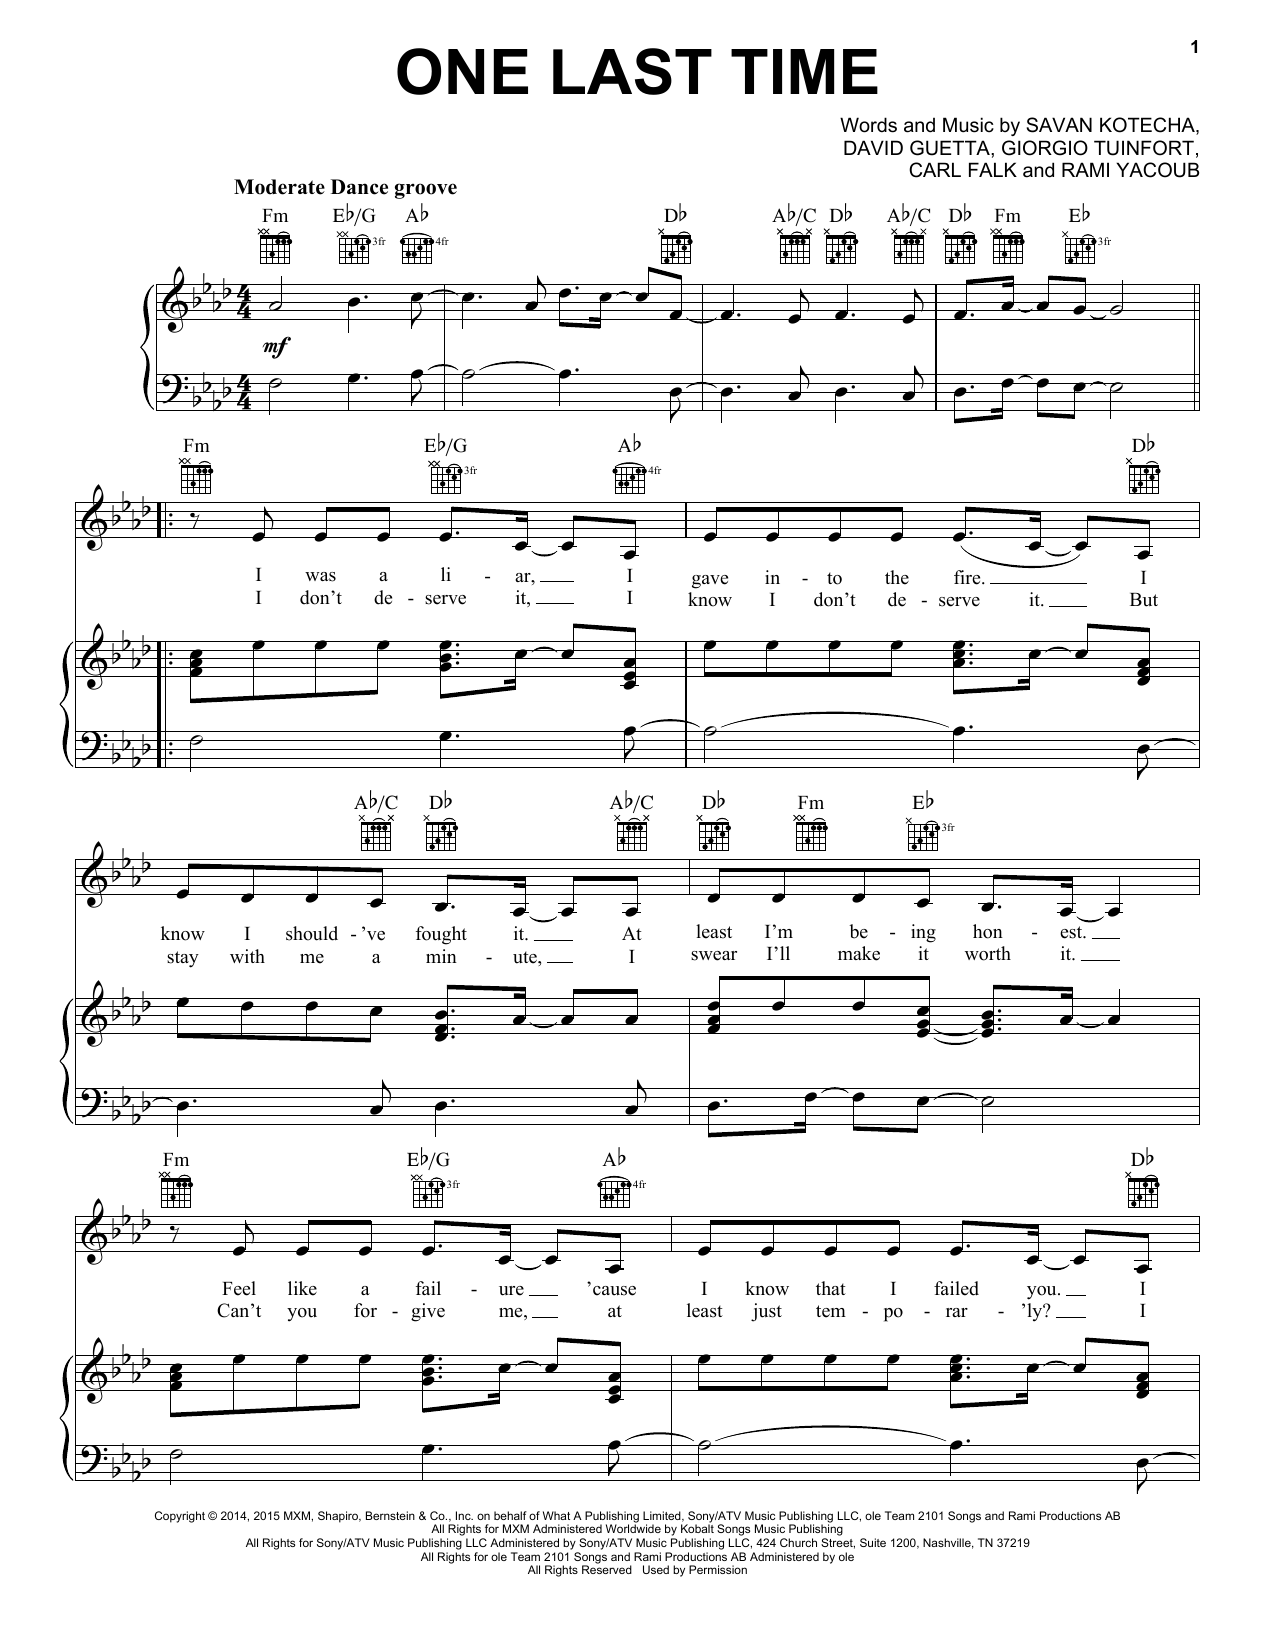 Download Ariana Grande One Last Time Sheet Music